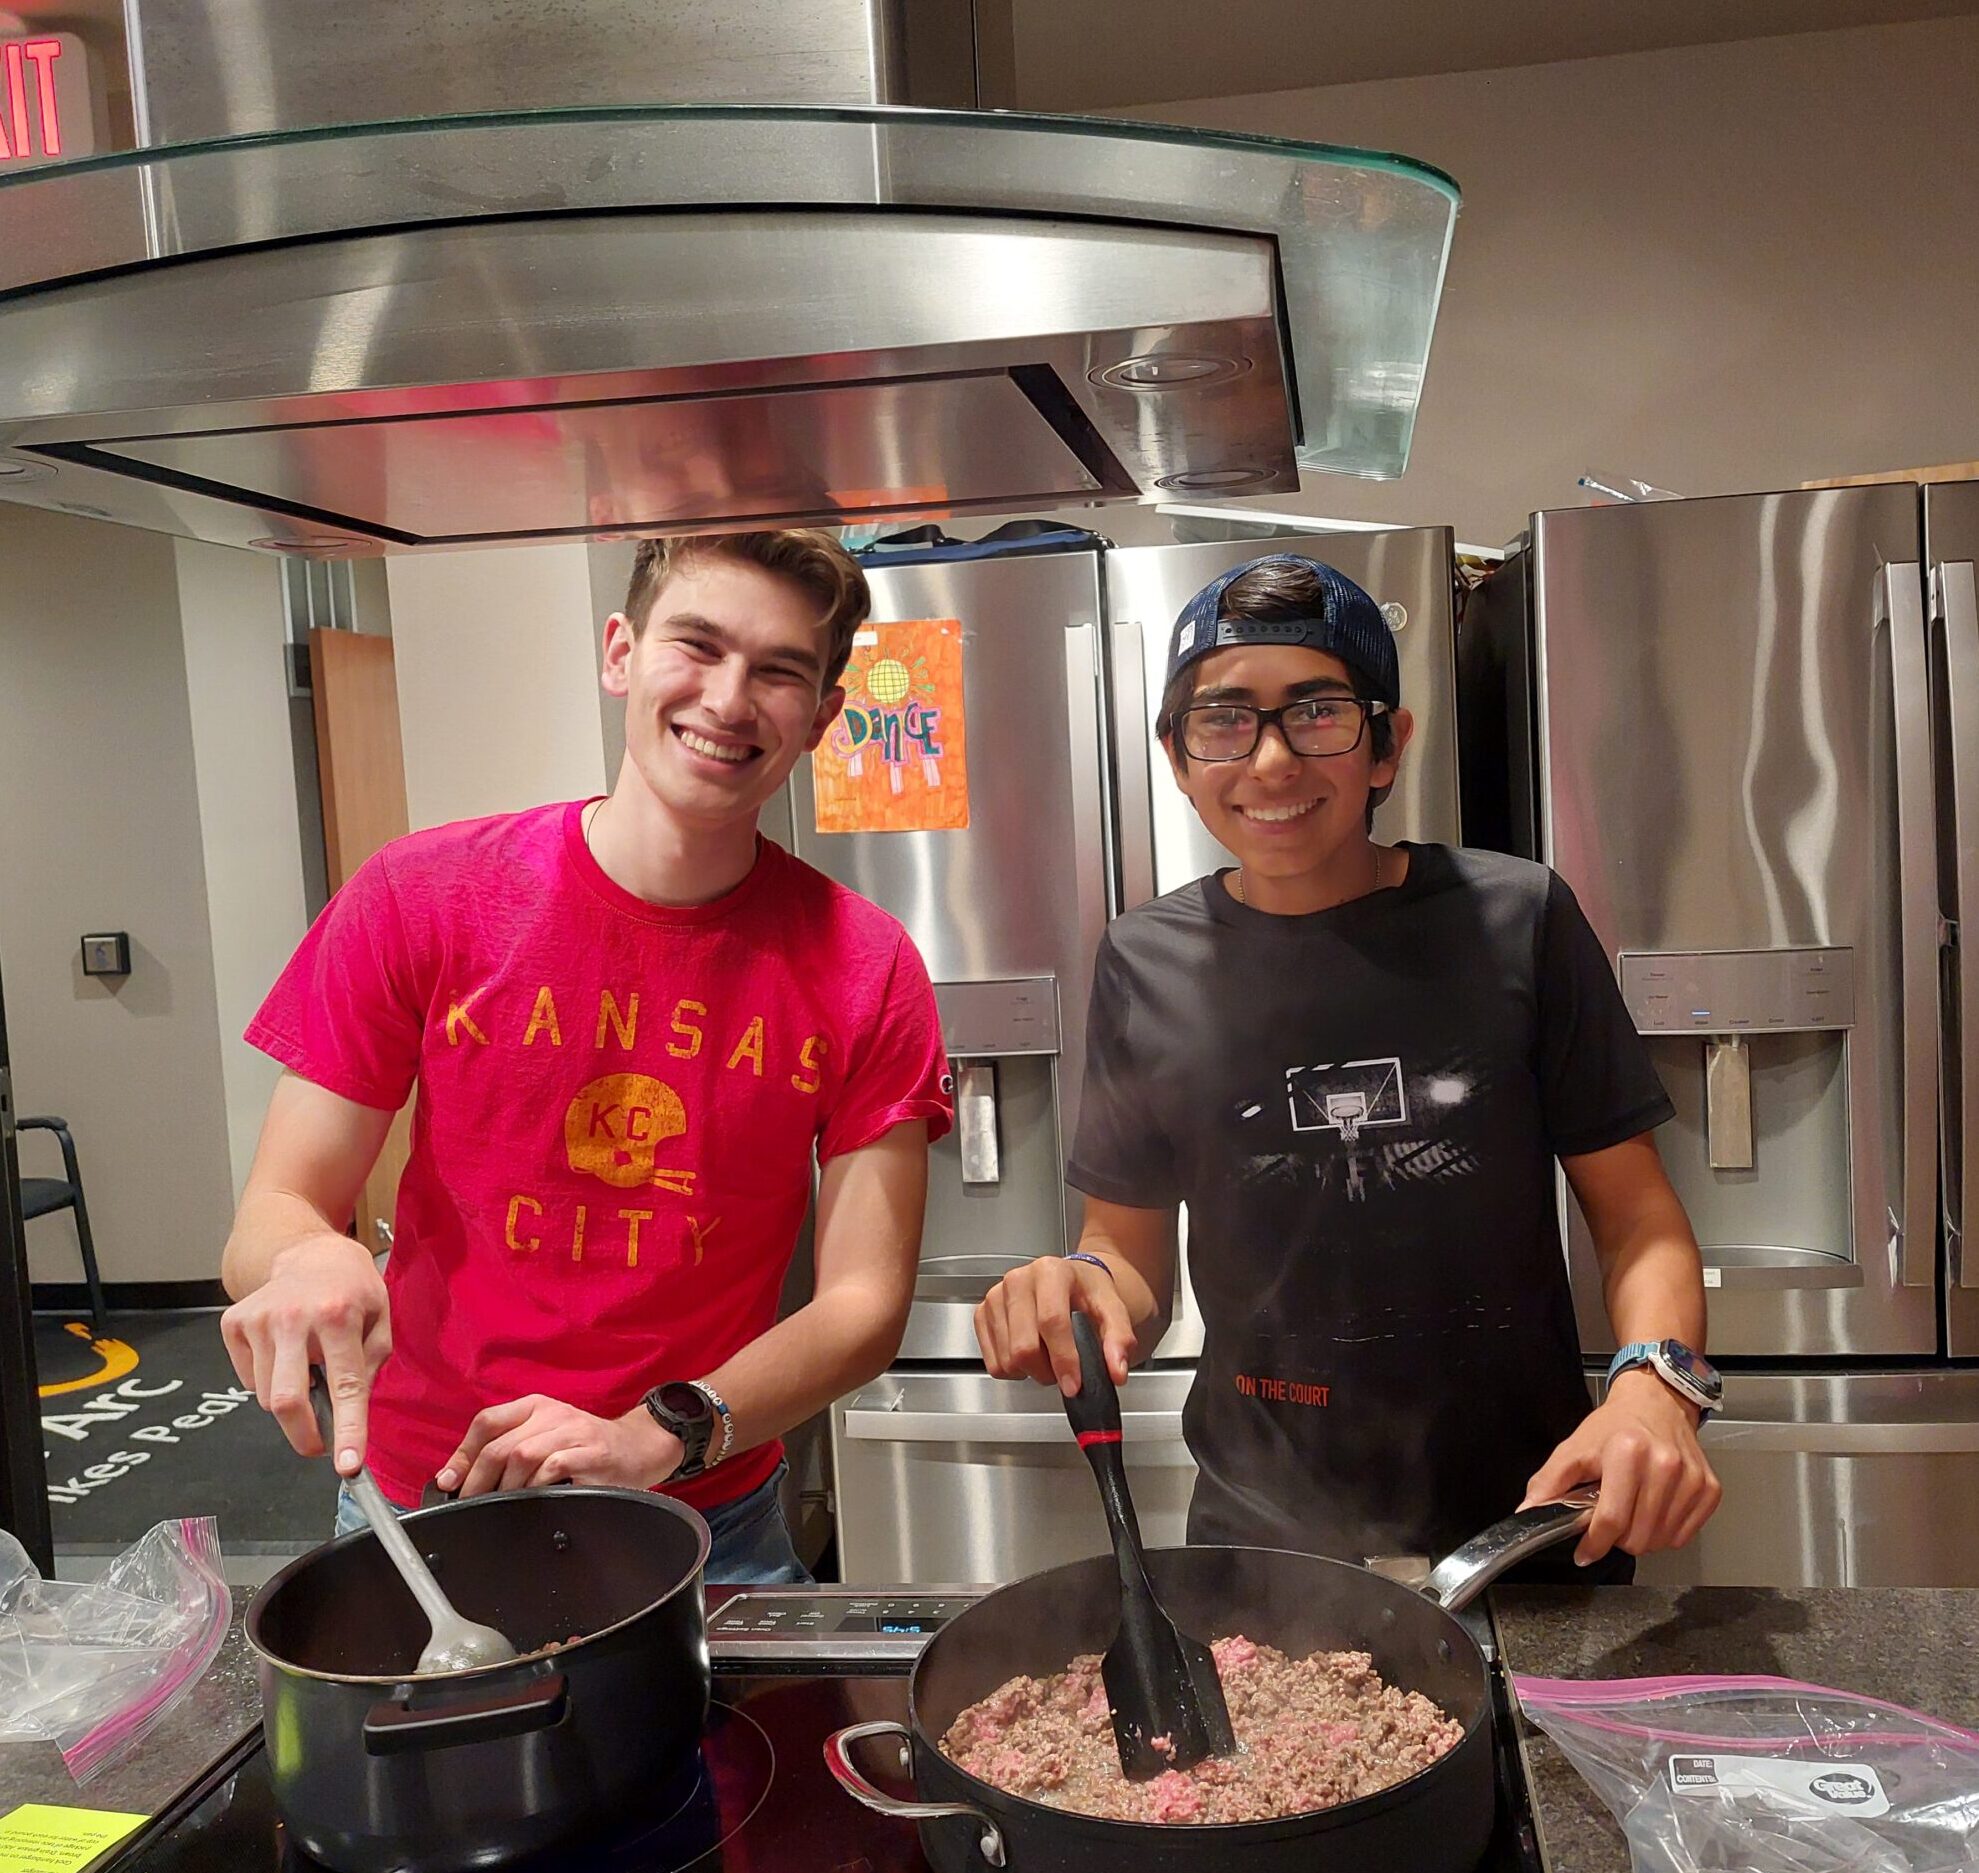 two young adults prepare food in a kitchen setting